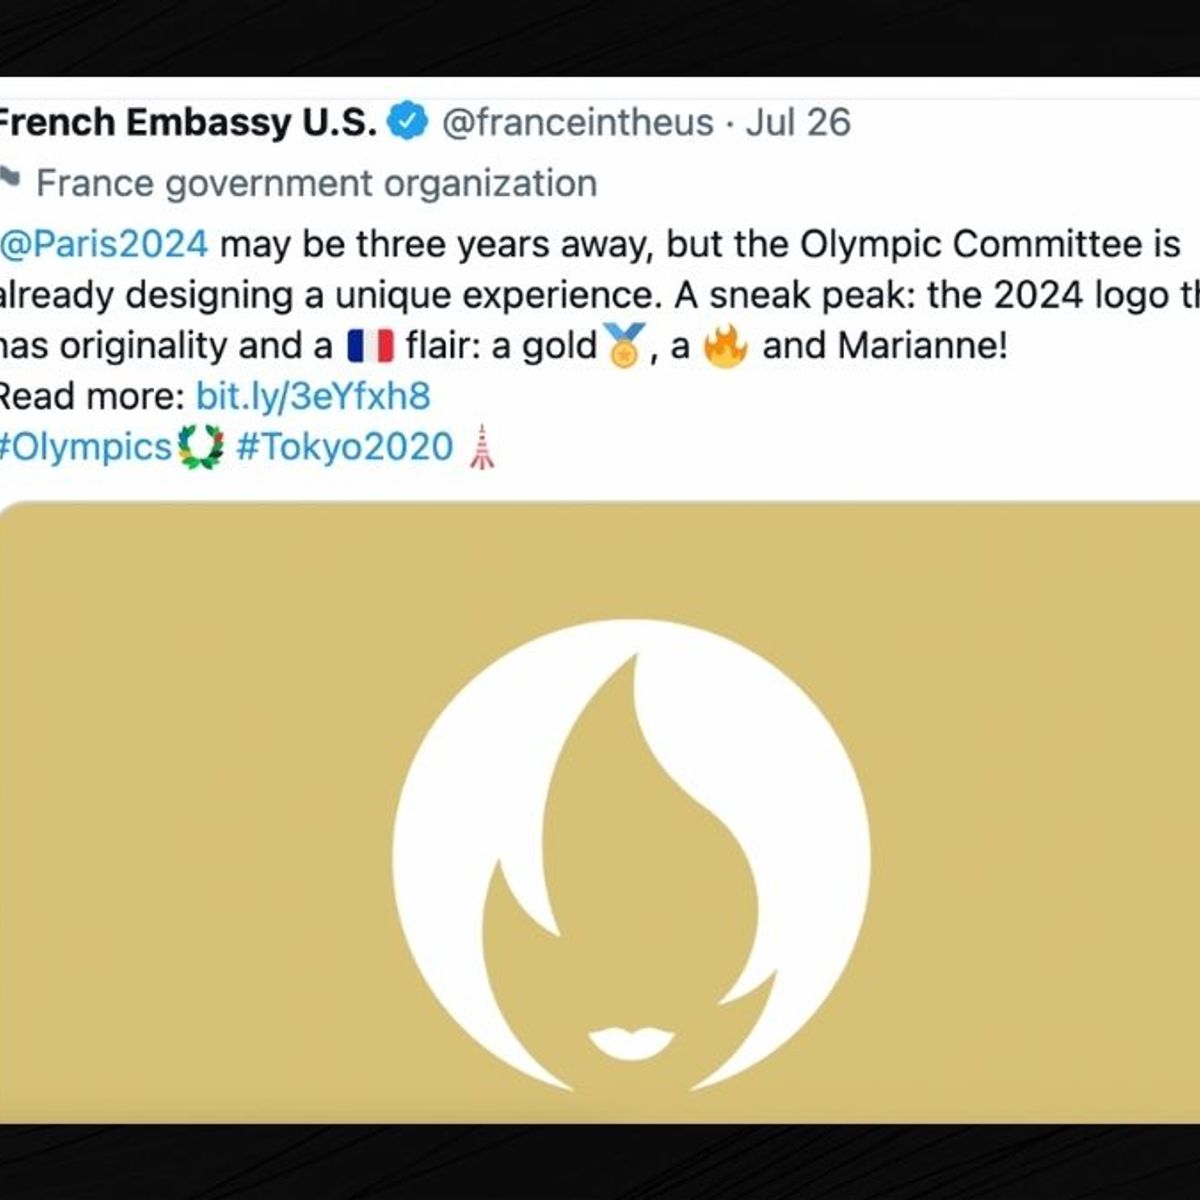 Olympic flame or dating ad? Paris 2024 logo divides opinion